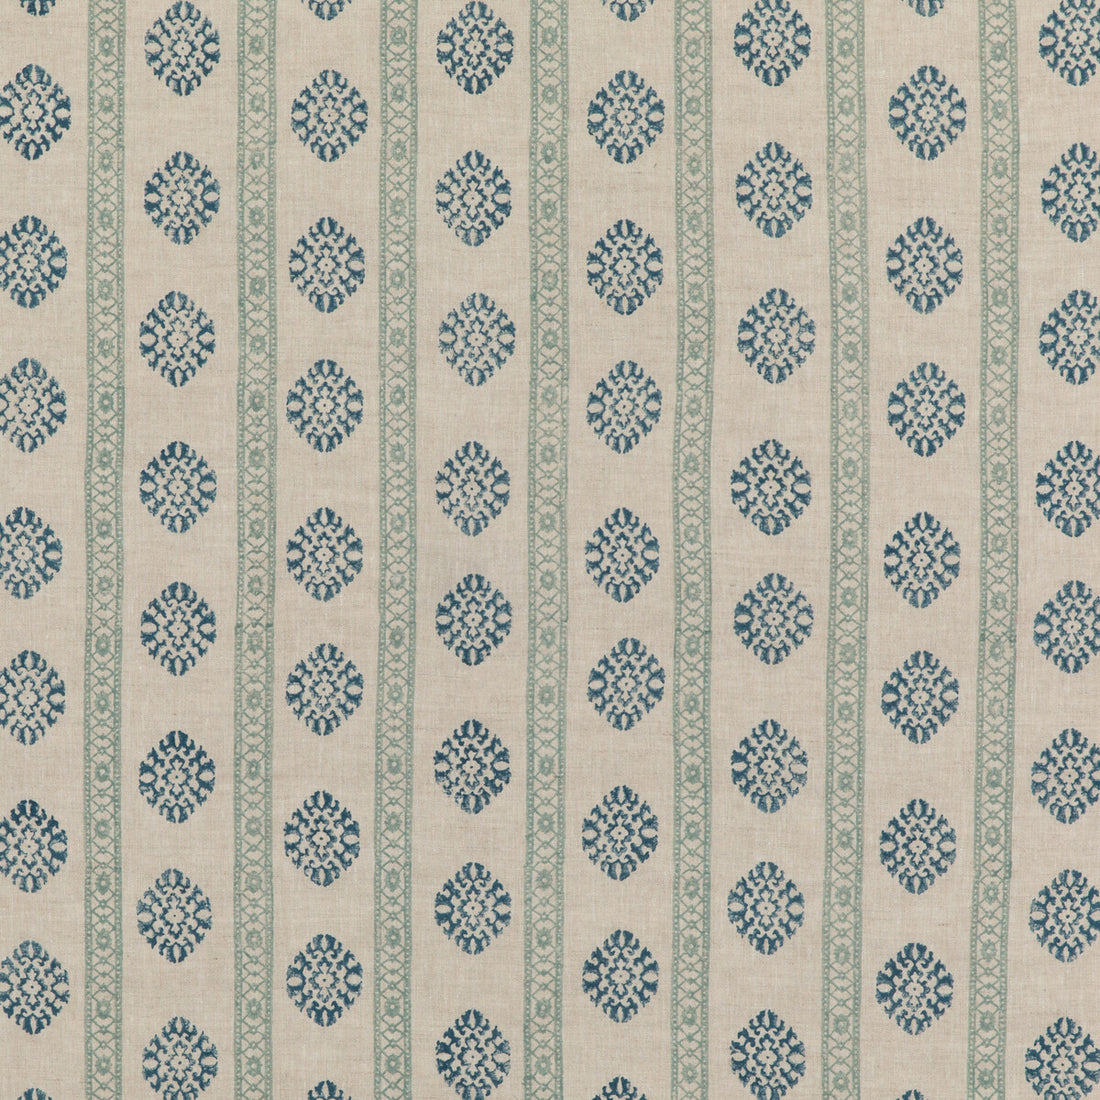 Alma fabric in aqua color - pattern BP10821.4.0 - by G P &amp; J Baker in the Coromandel Small Prints collection